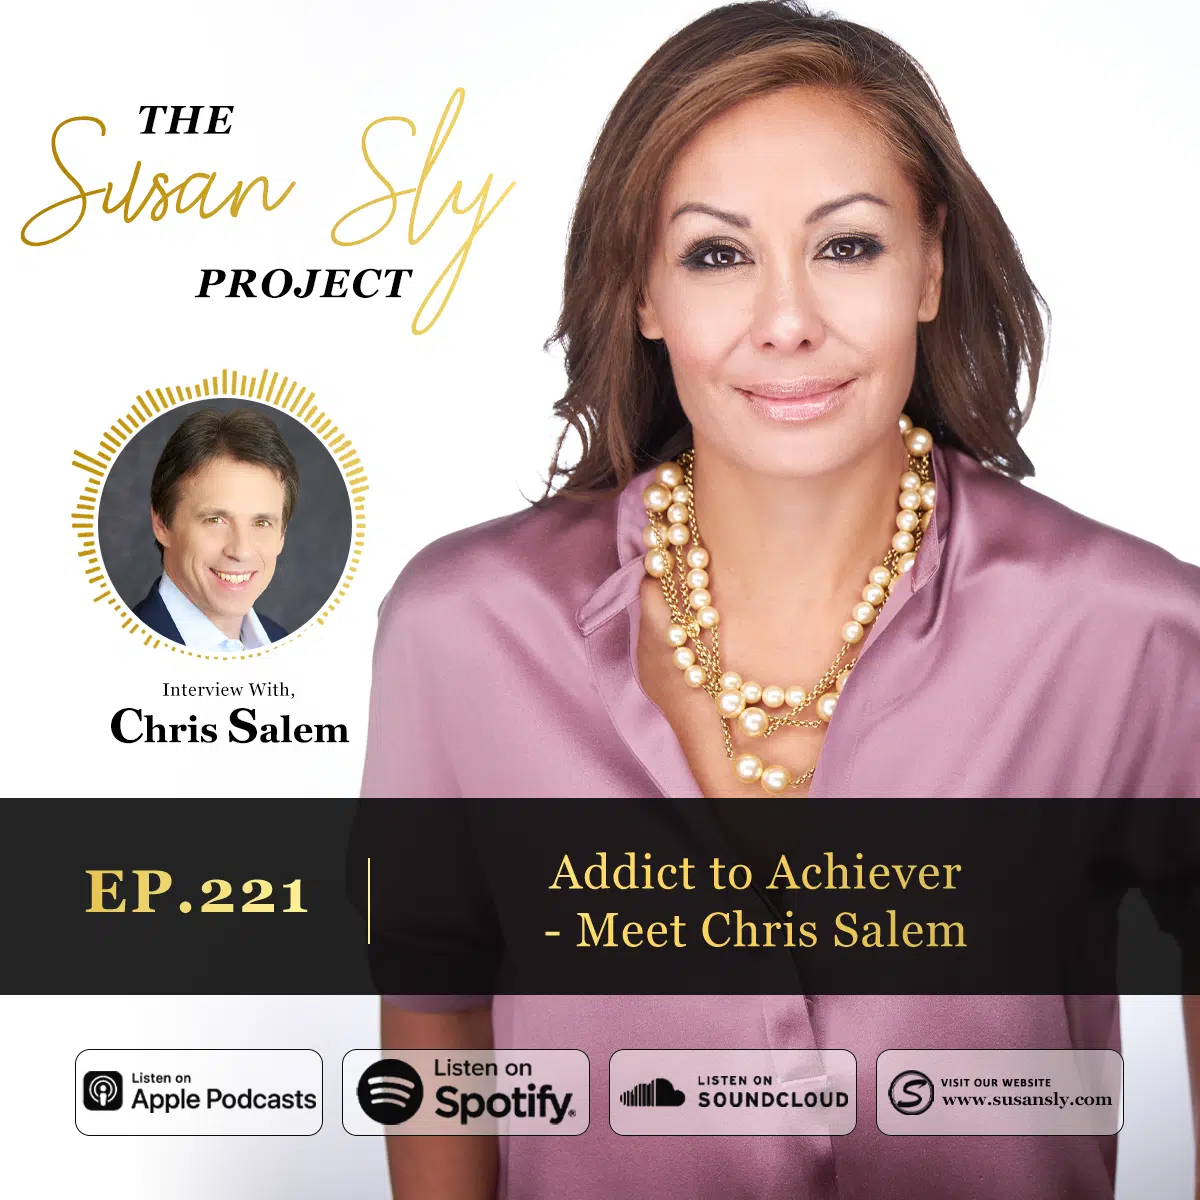 Susan Sly interview with Chris Salem